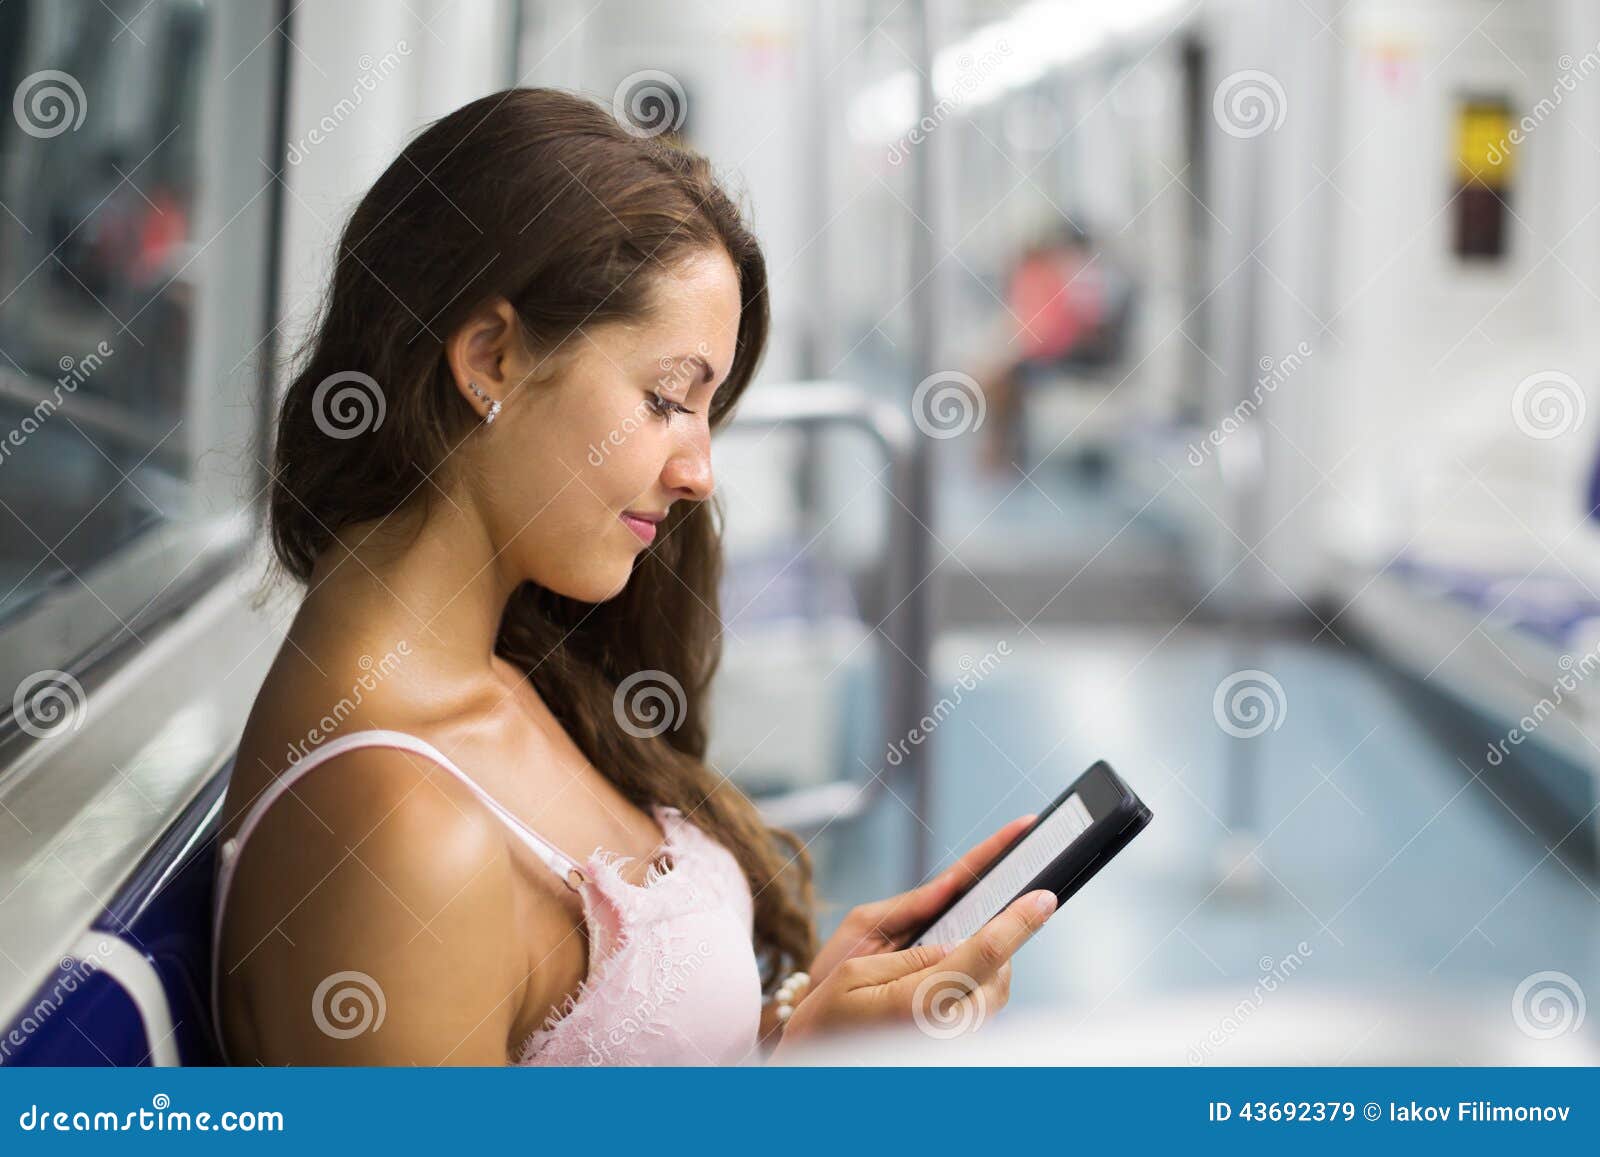 woman with ereader in subway train